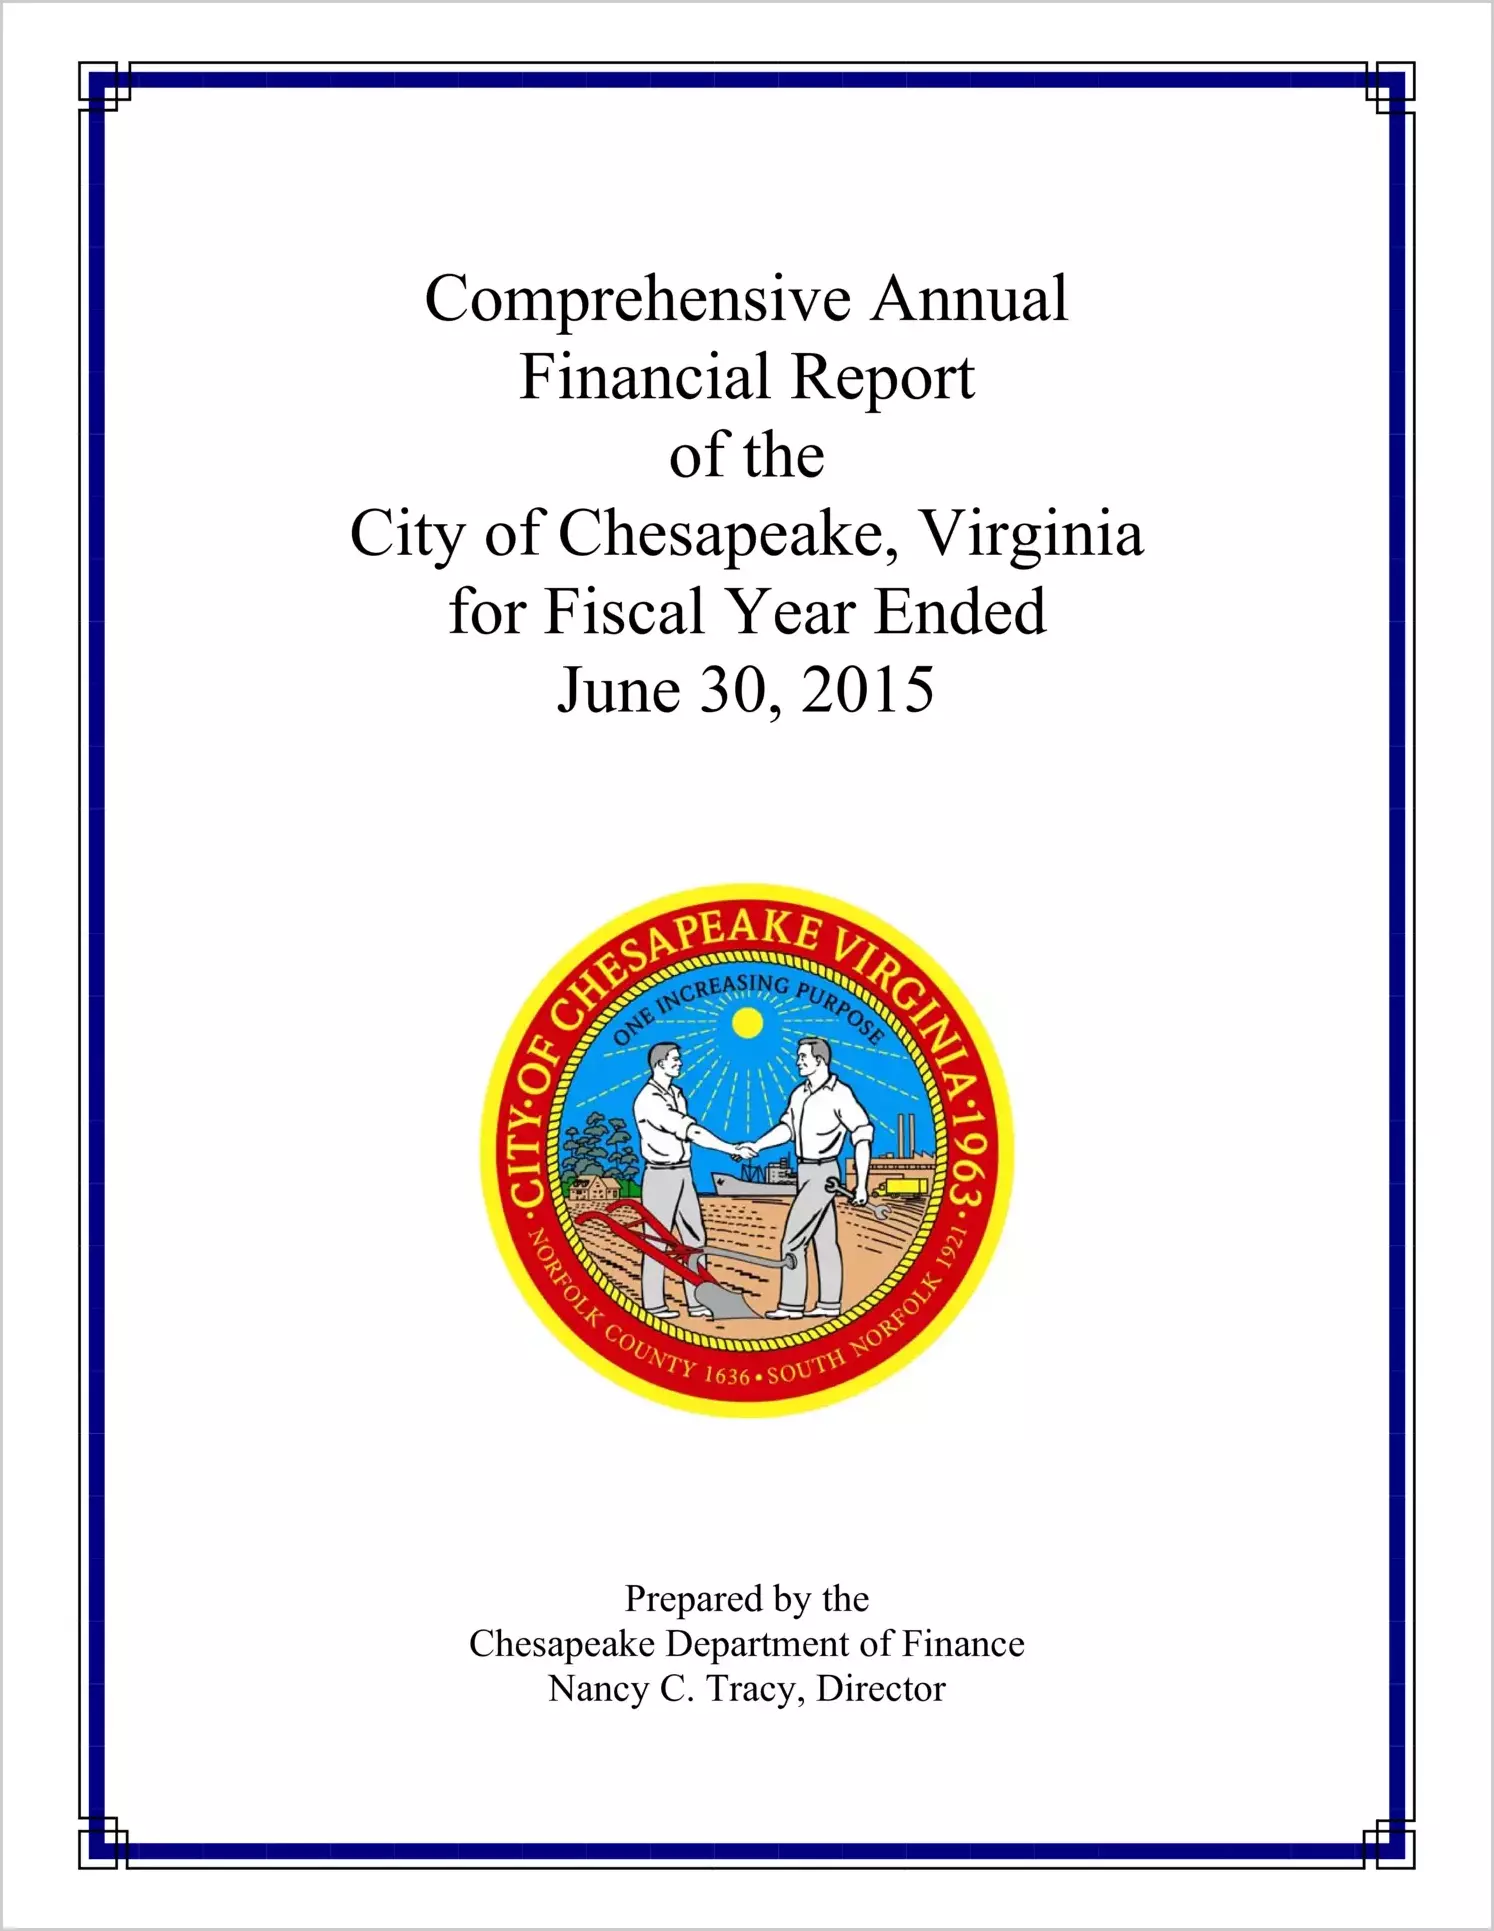 2015 Annual Financial Report for City of Chesapeake